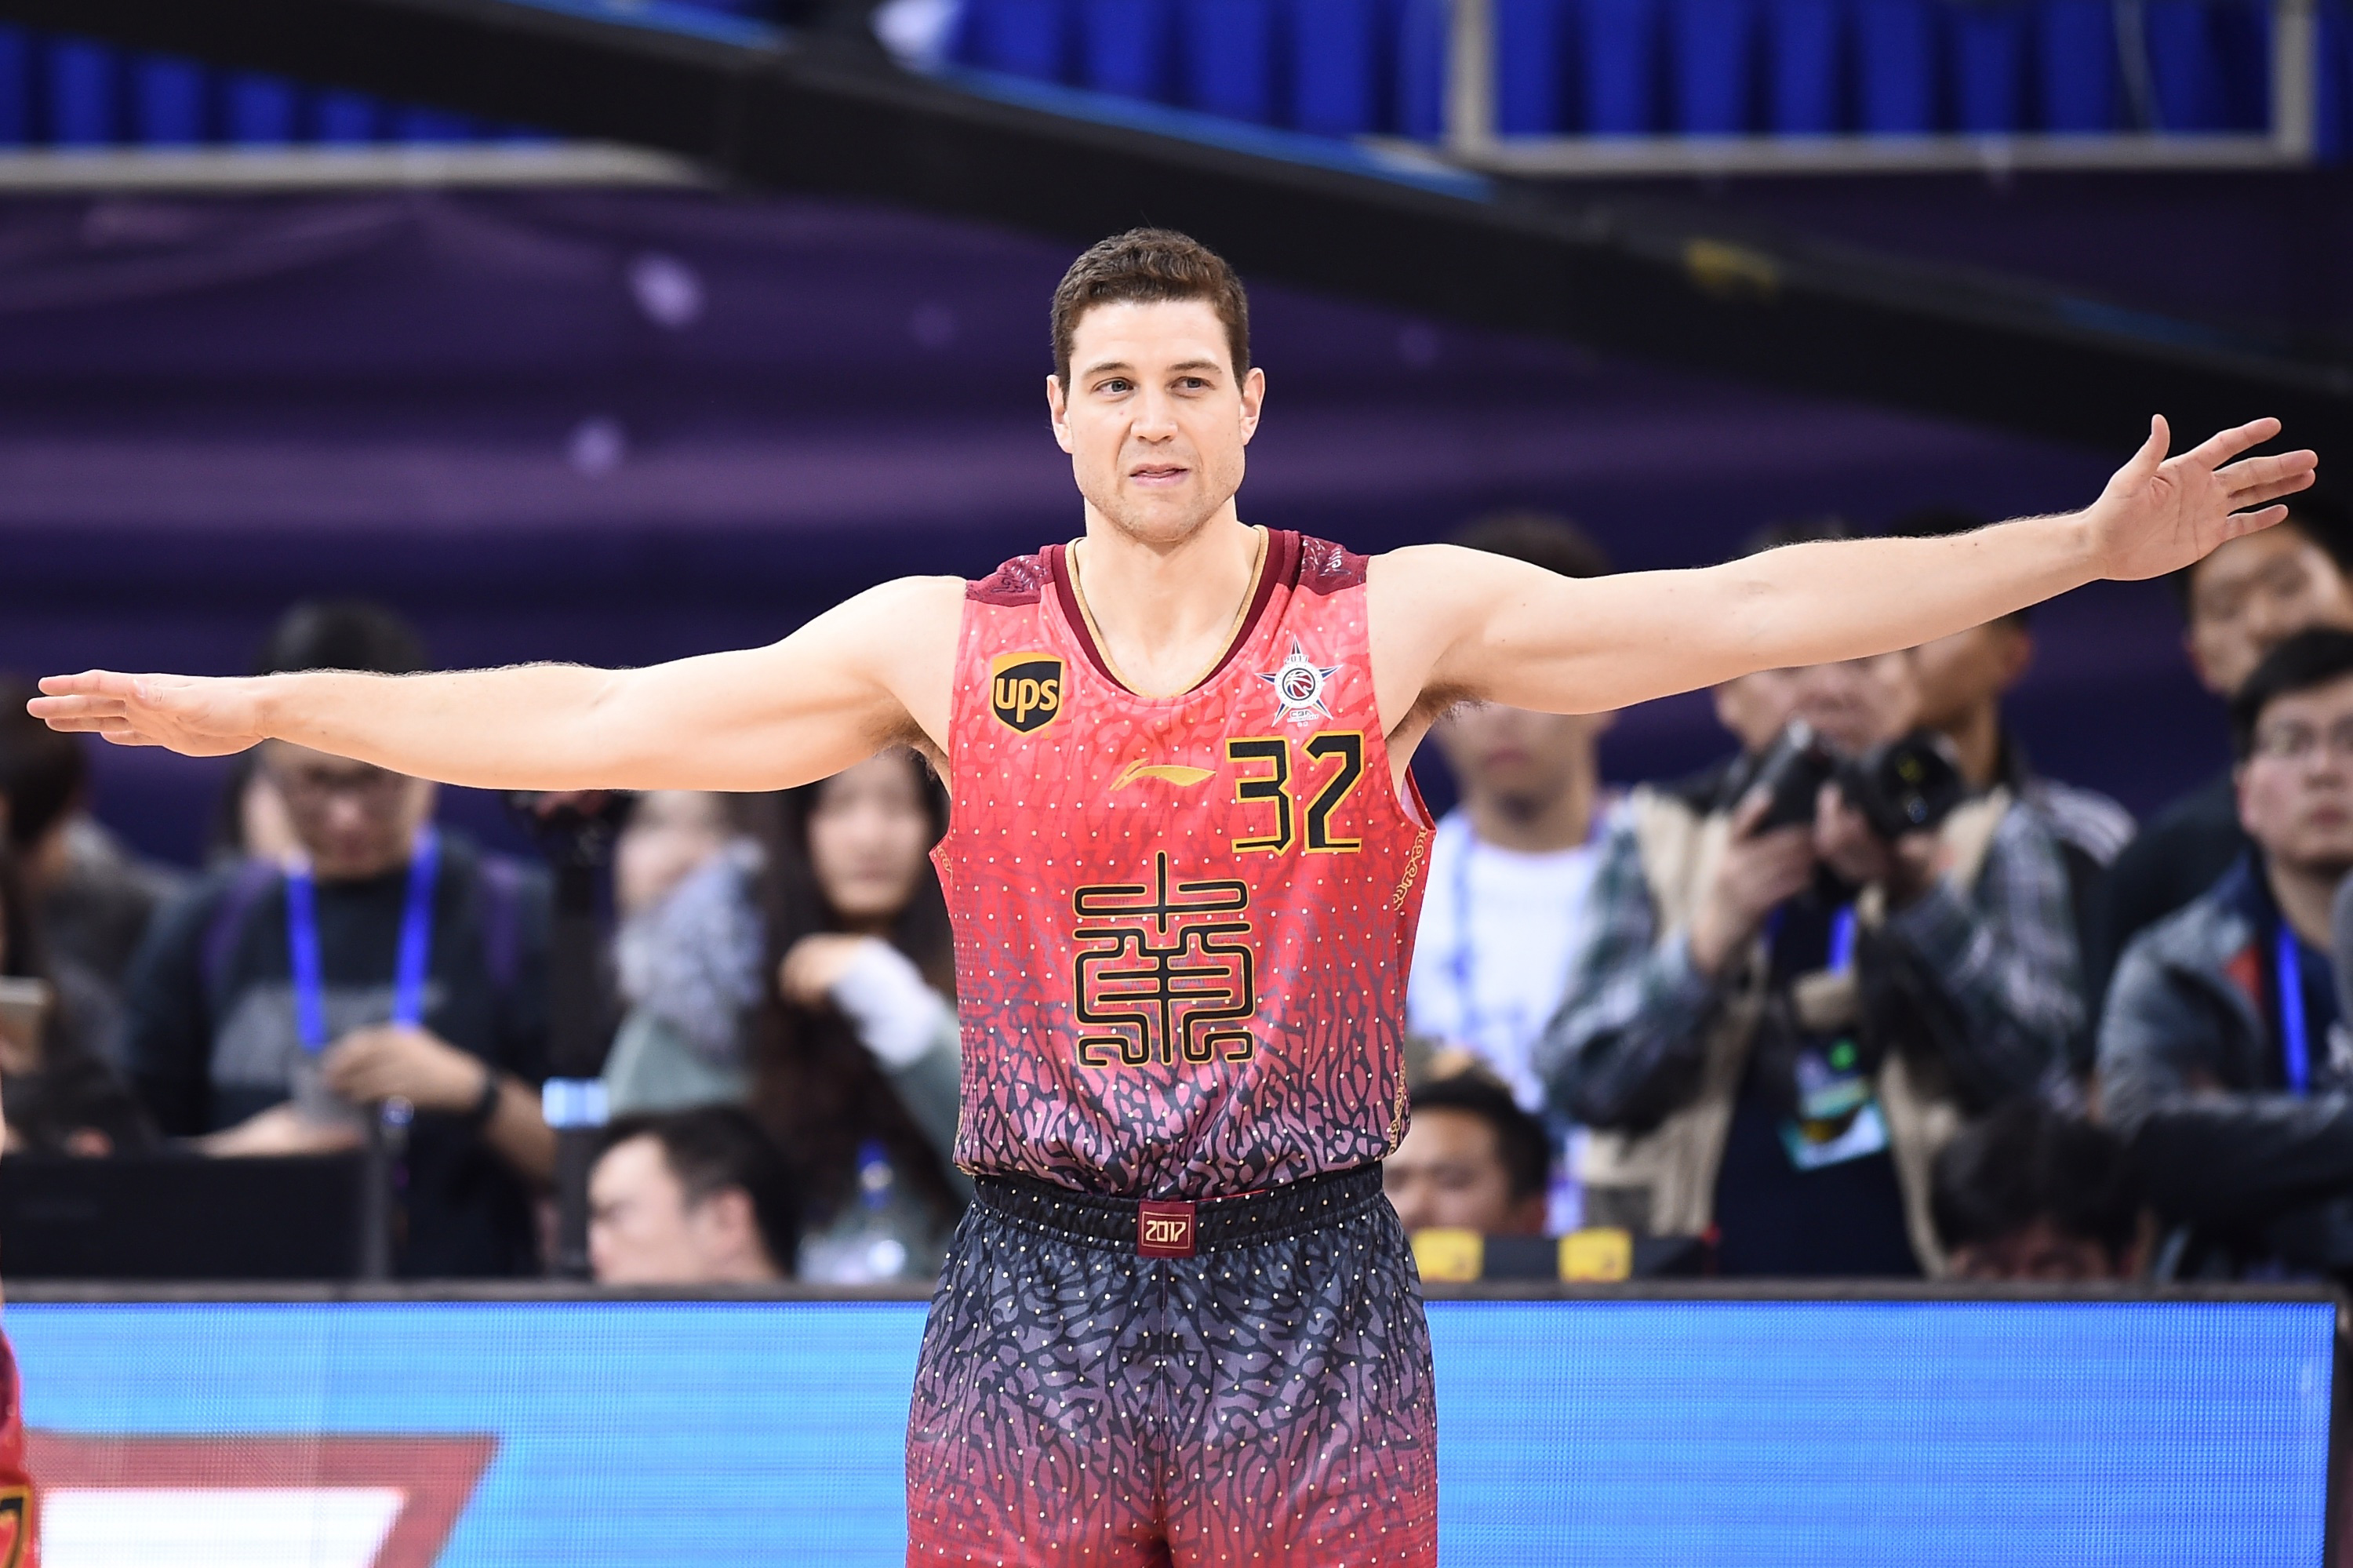 Jimmer Fredette's New 361 JiFeng Signature Shoe Is Heat